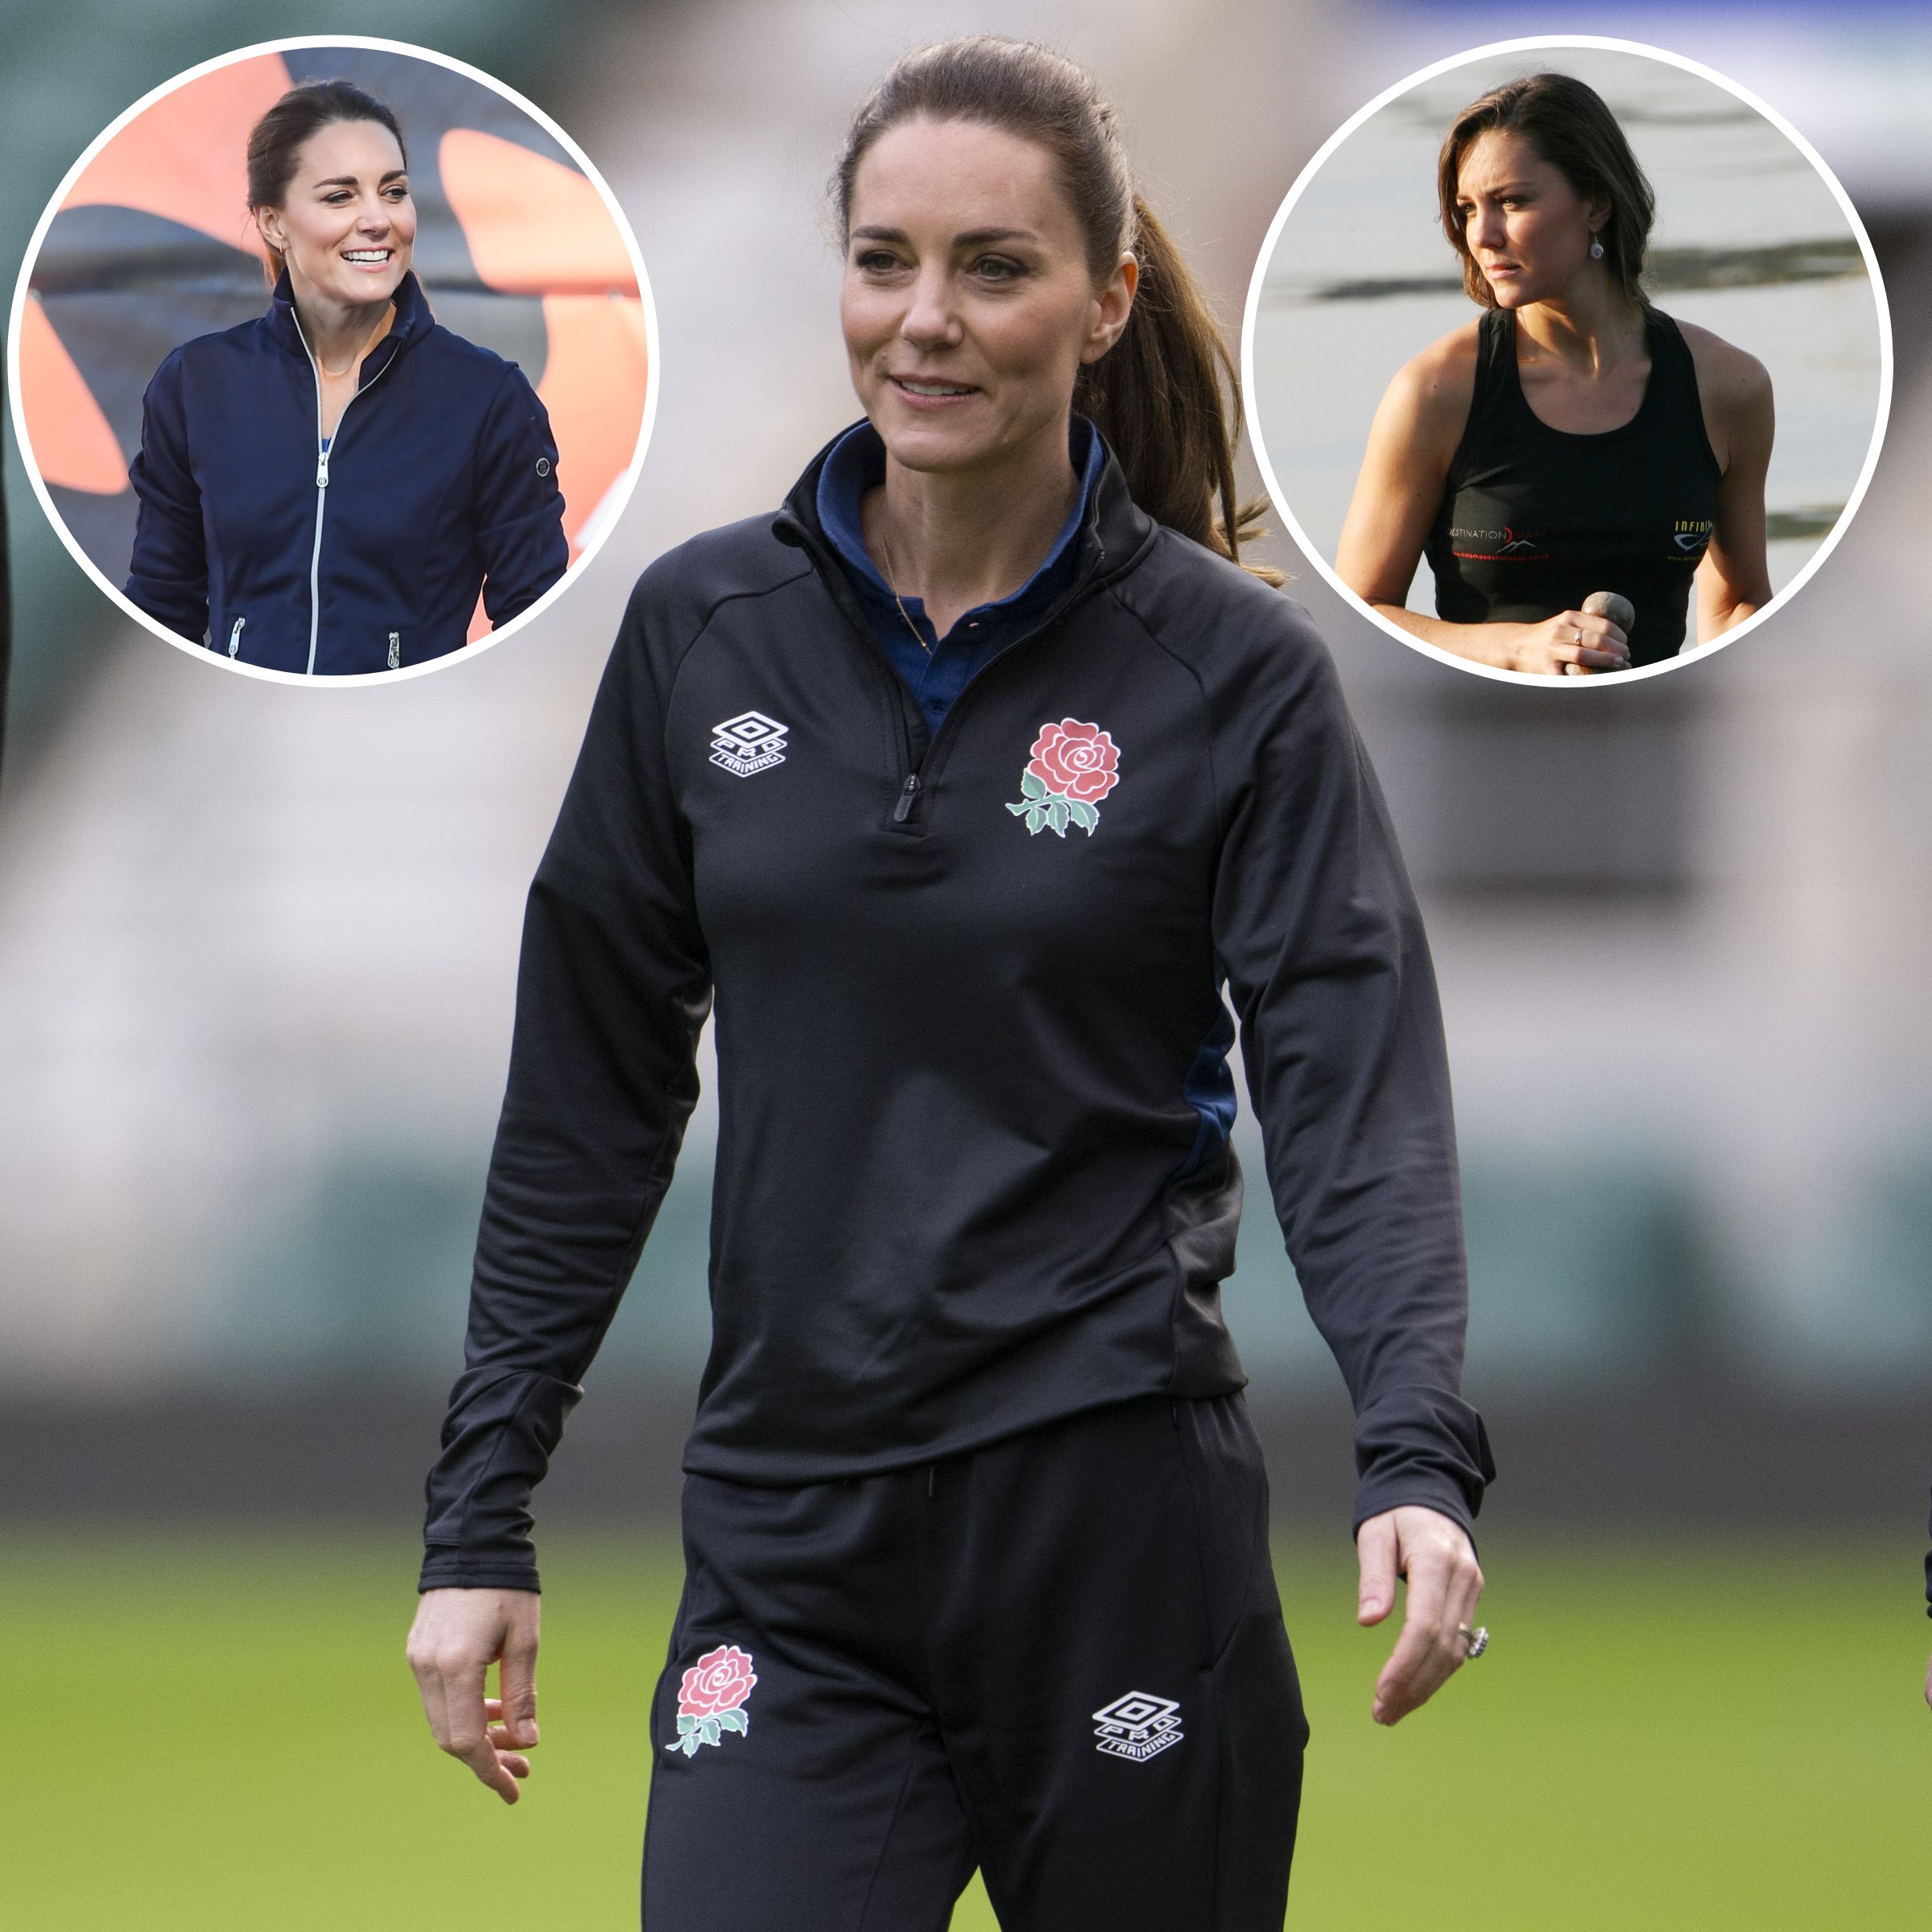 https://www.lifeandstylemag.com/wp-content/uploads/2022/08/This-Duchess-Is-Athletic-See-Photos-of-Kate-Middleton-in-Workout-Clothes-and-Athleisure-Outfits-.jpg?fit=2400%2C2400&quality=86&strip=all